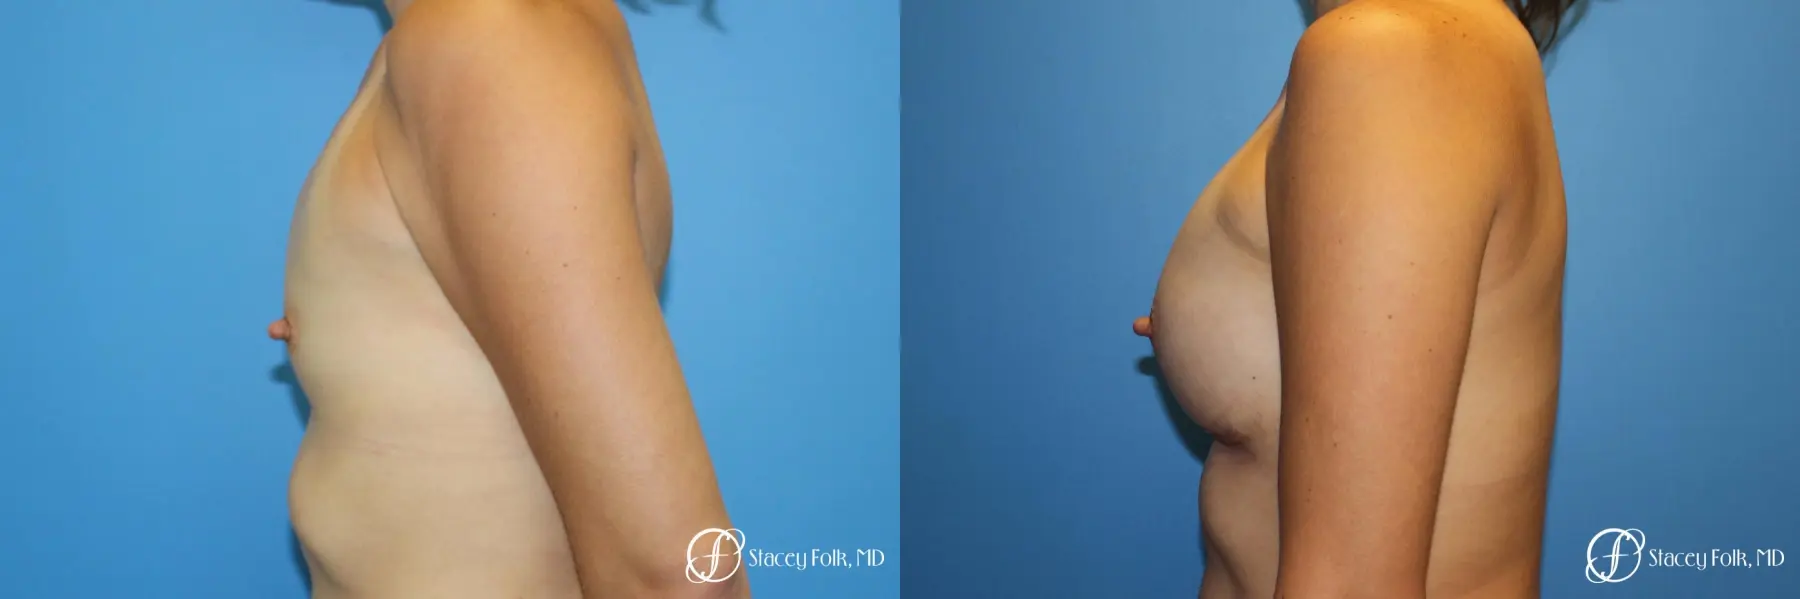 Denver Breast augmentation using textured anatomical implants 5849 - Before and After 3